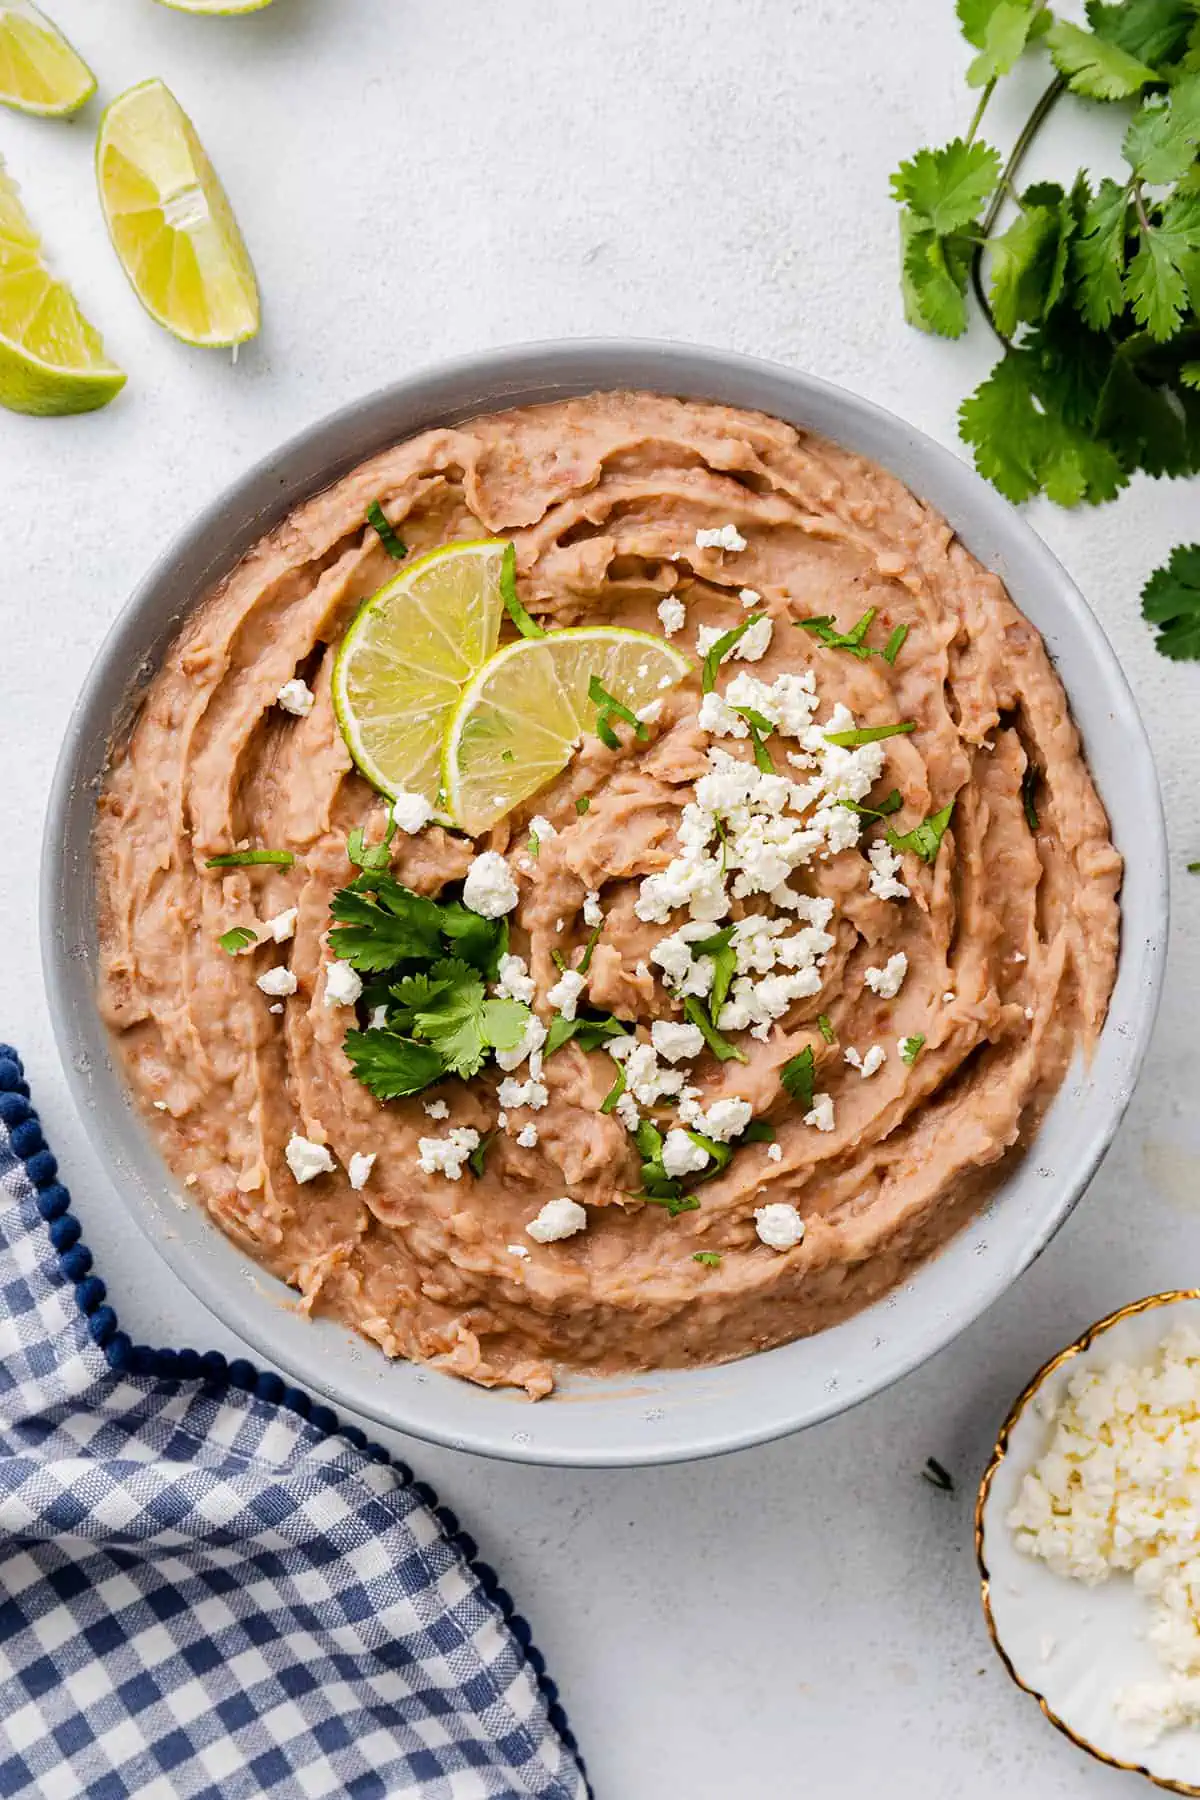 Overhead view of a bowl of refried beans topped with cheese, cilantro, and lime slices